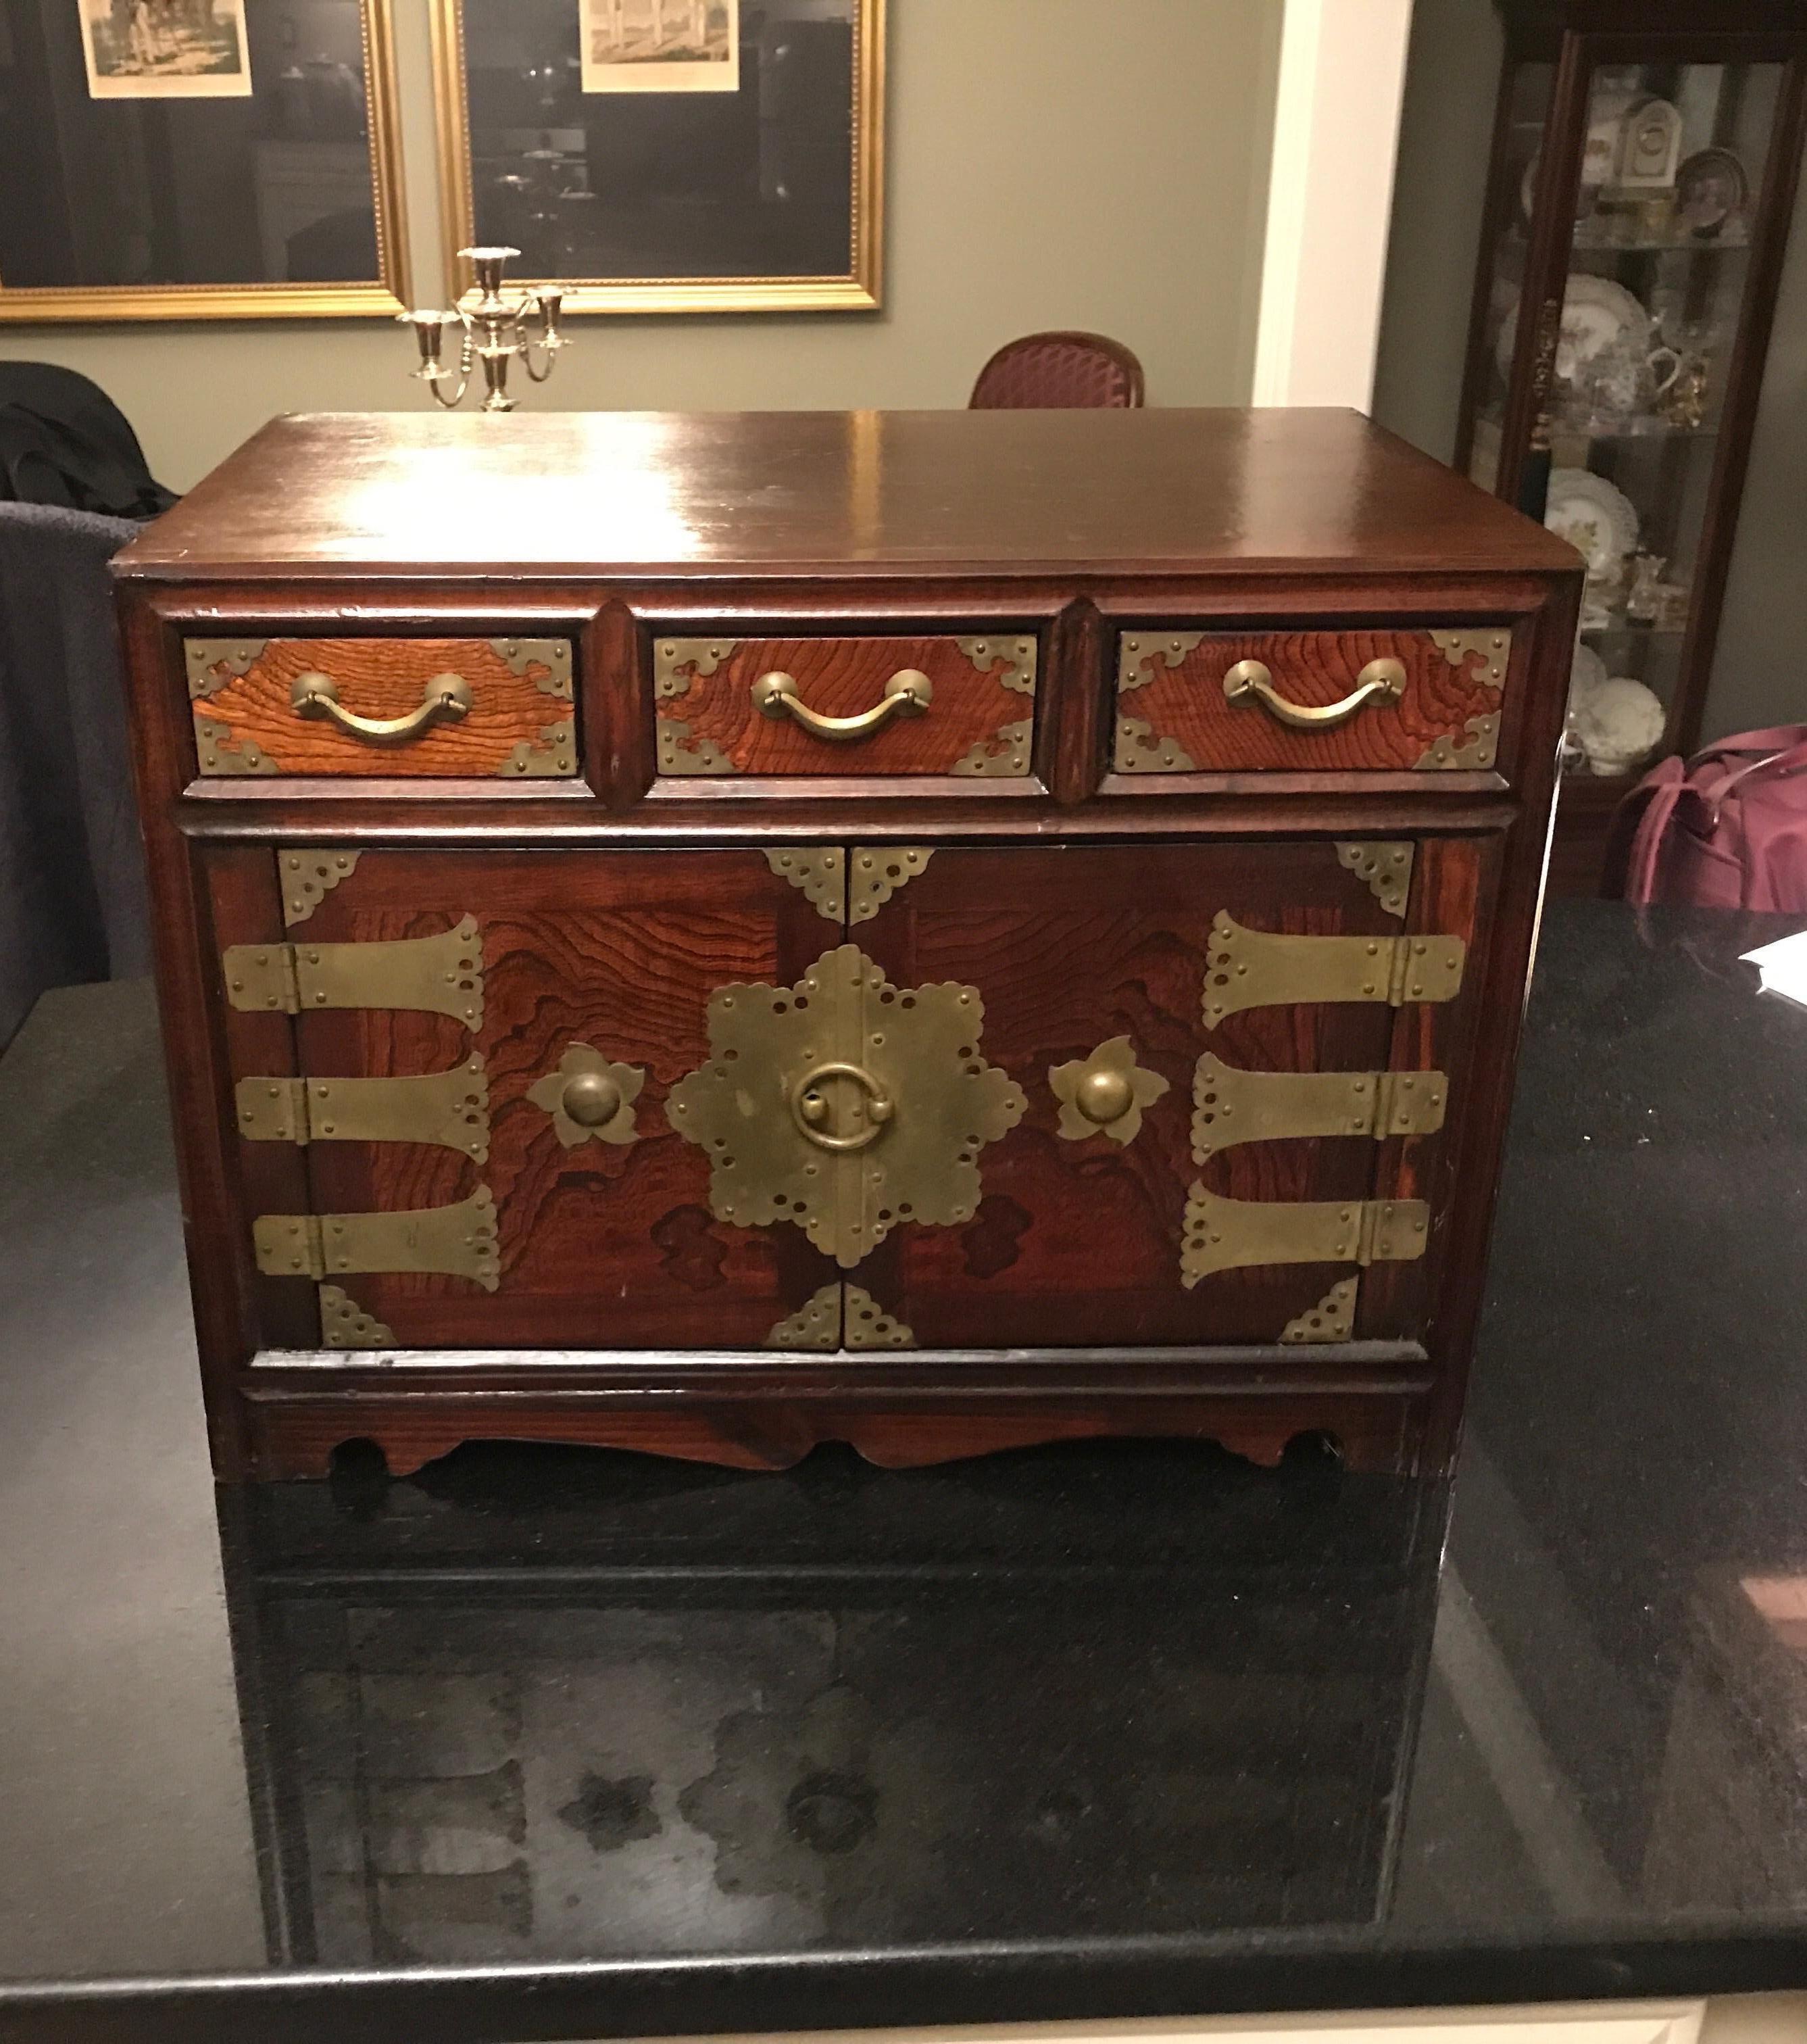 A Korean hardwood diminutive chest with brass mounts. The two doors open to reveal storage and drawers with three drawers along the top. The highly figurative wood on the front door and drawer panels with a slightly darker top and sides.

Measures: